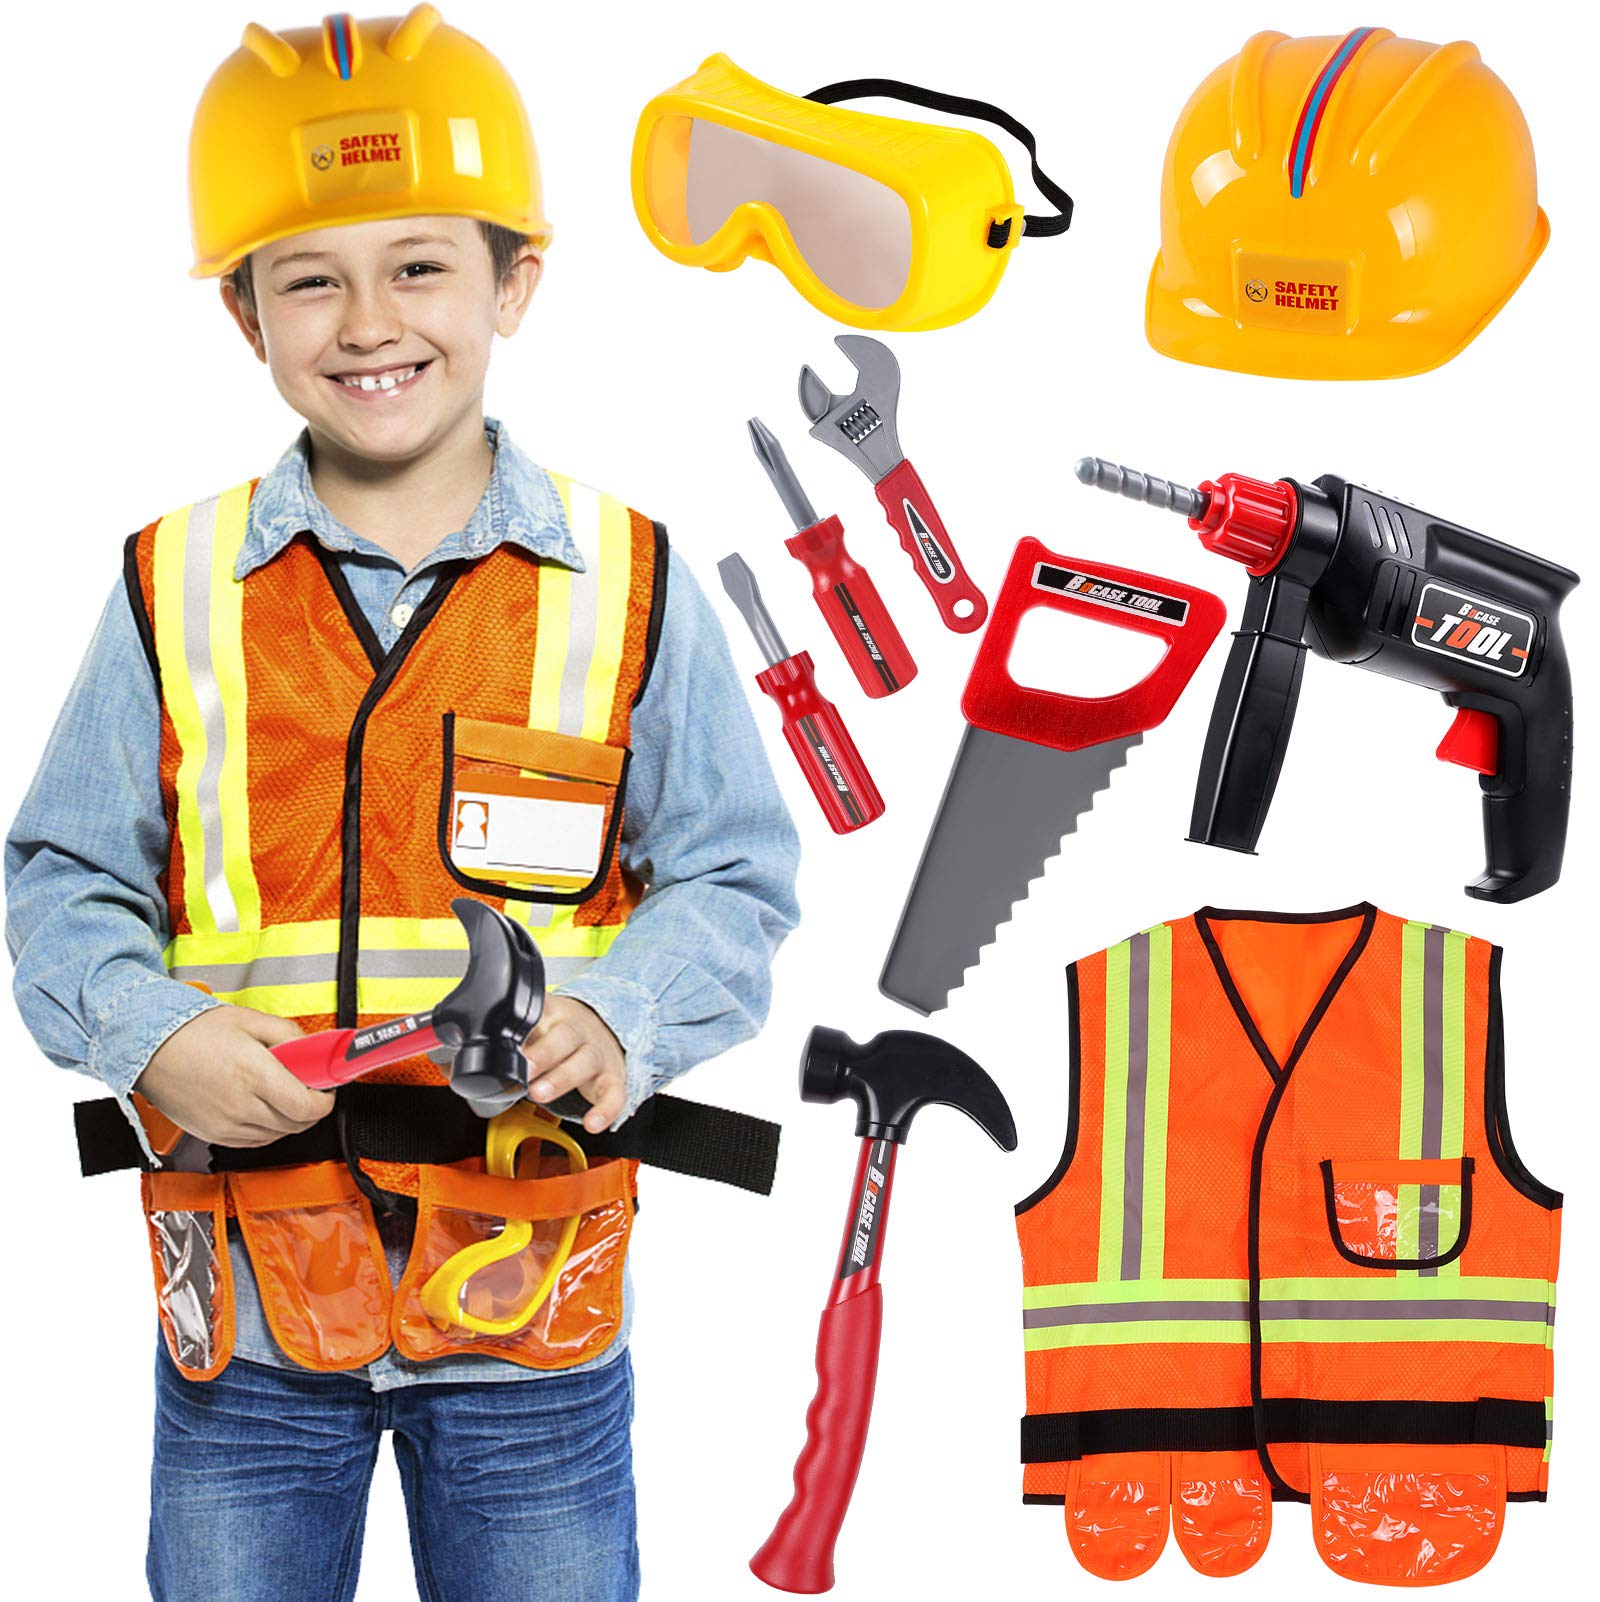 Construction Worker Costume Kids Role Play Dress up Set for 3 4 5 6 Years Toddlers Girls Boys Toys